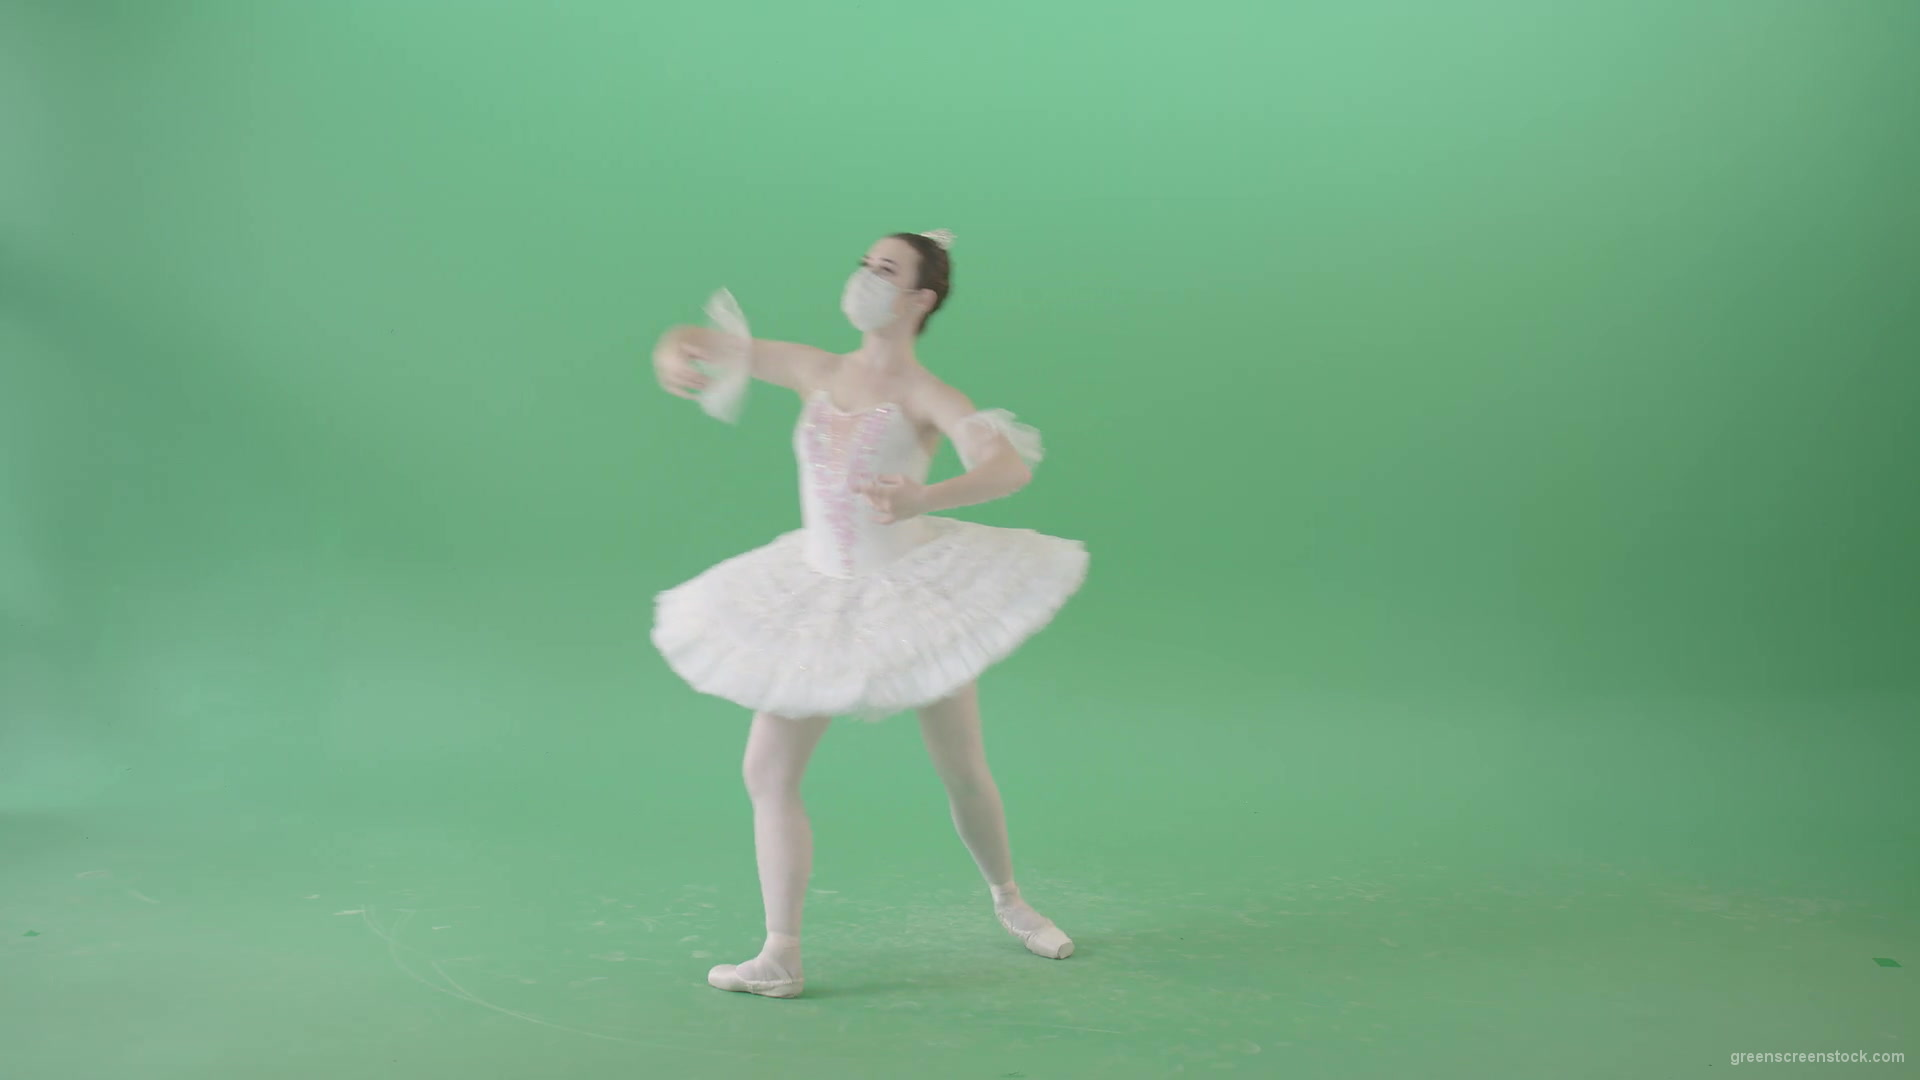 Amazing-Flowing-dance-by-Ballerina-ballet-girl-looking-for-Corona-Virus-isolated-on-Green-Screen-Viral-4K-Video-Footage-1920_004 Green Screen Stock